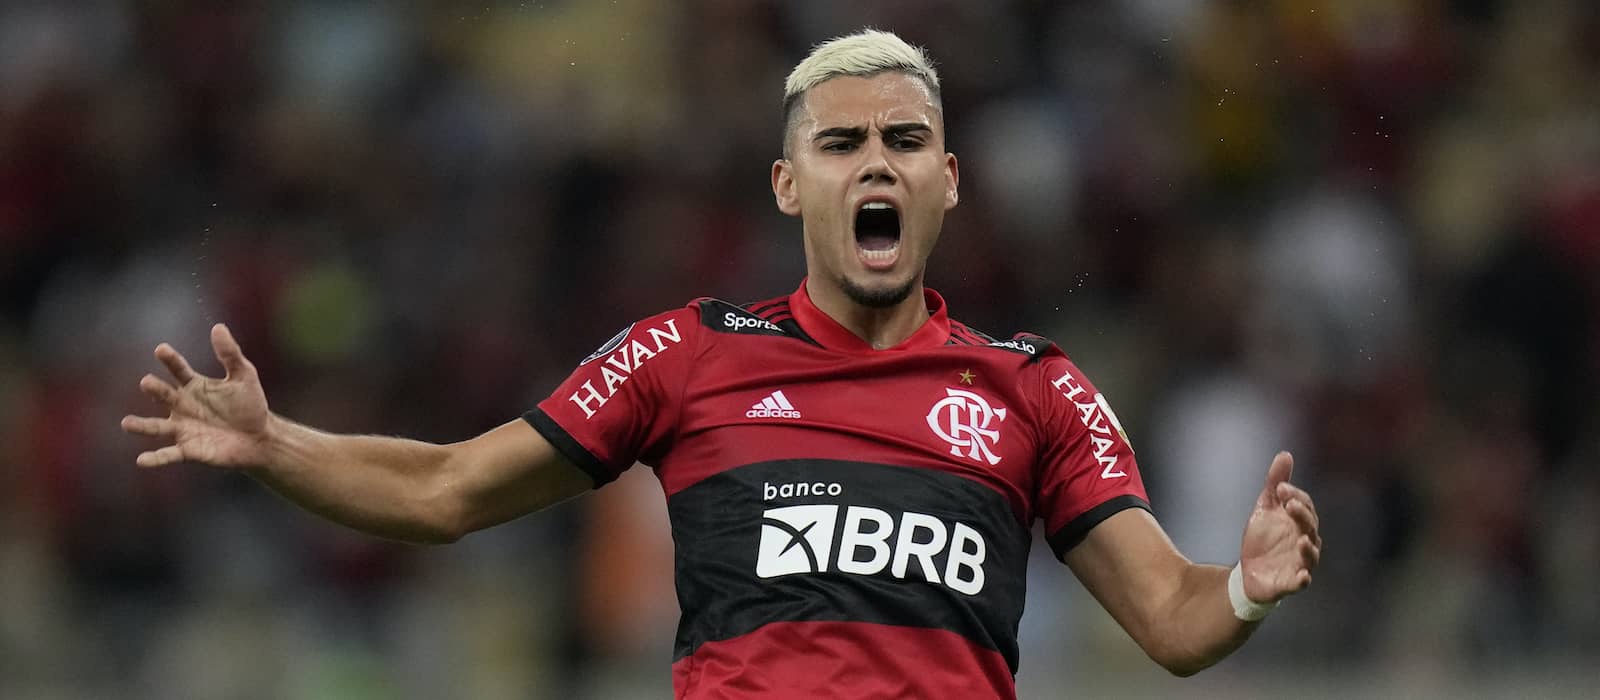 Man United&#39;s Andreas Pereira scores golazo for Flamengo - Man United News  And Transfer News | The Peoples Person